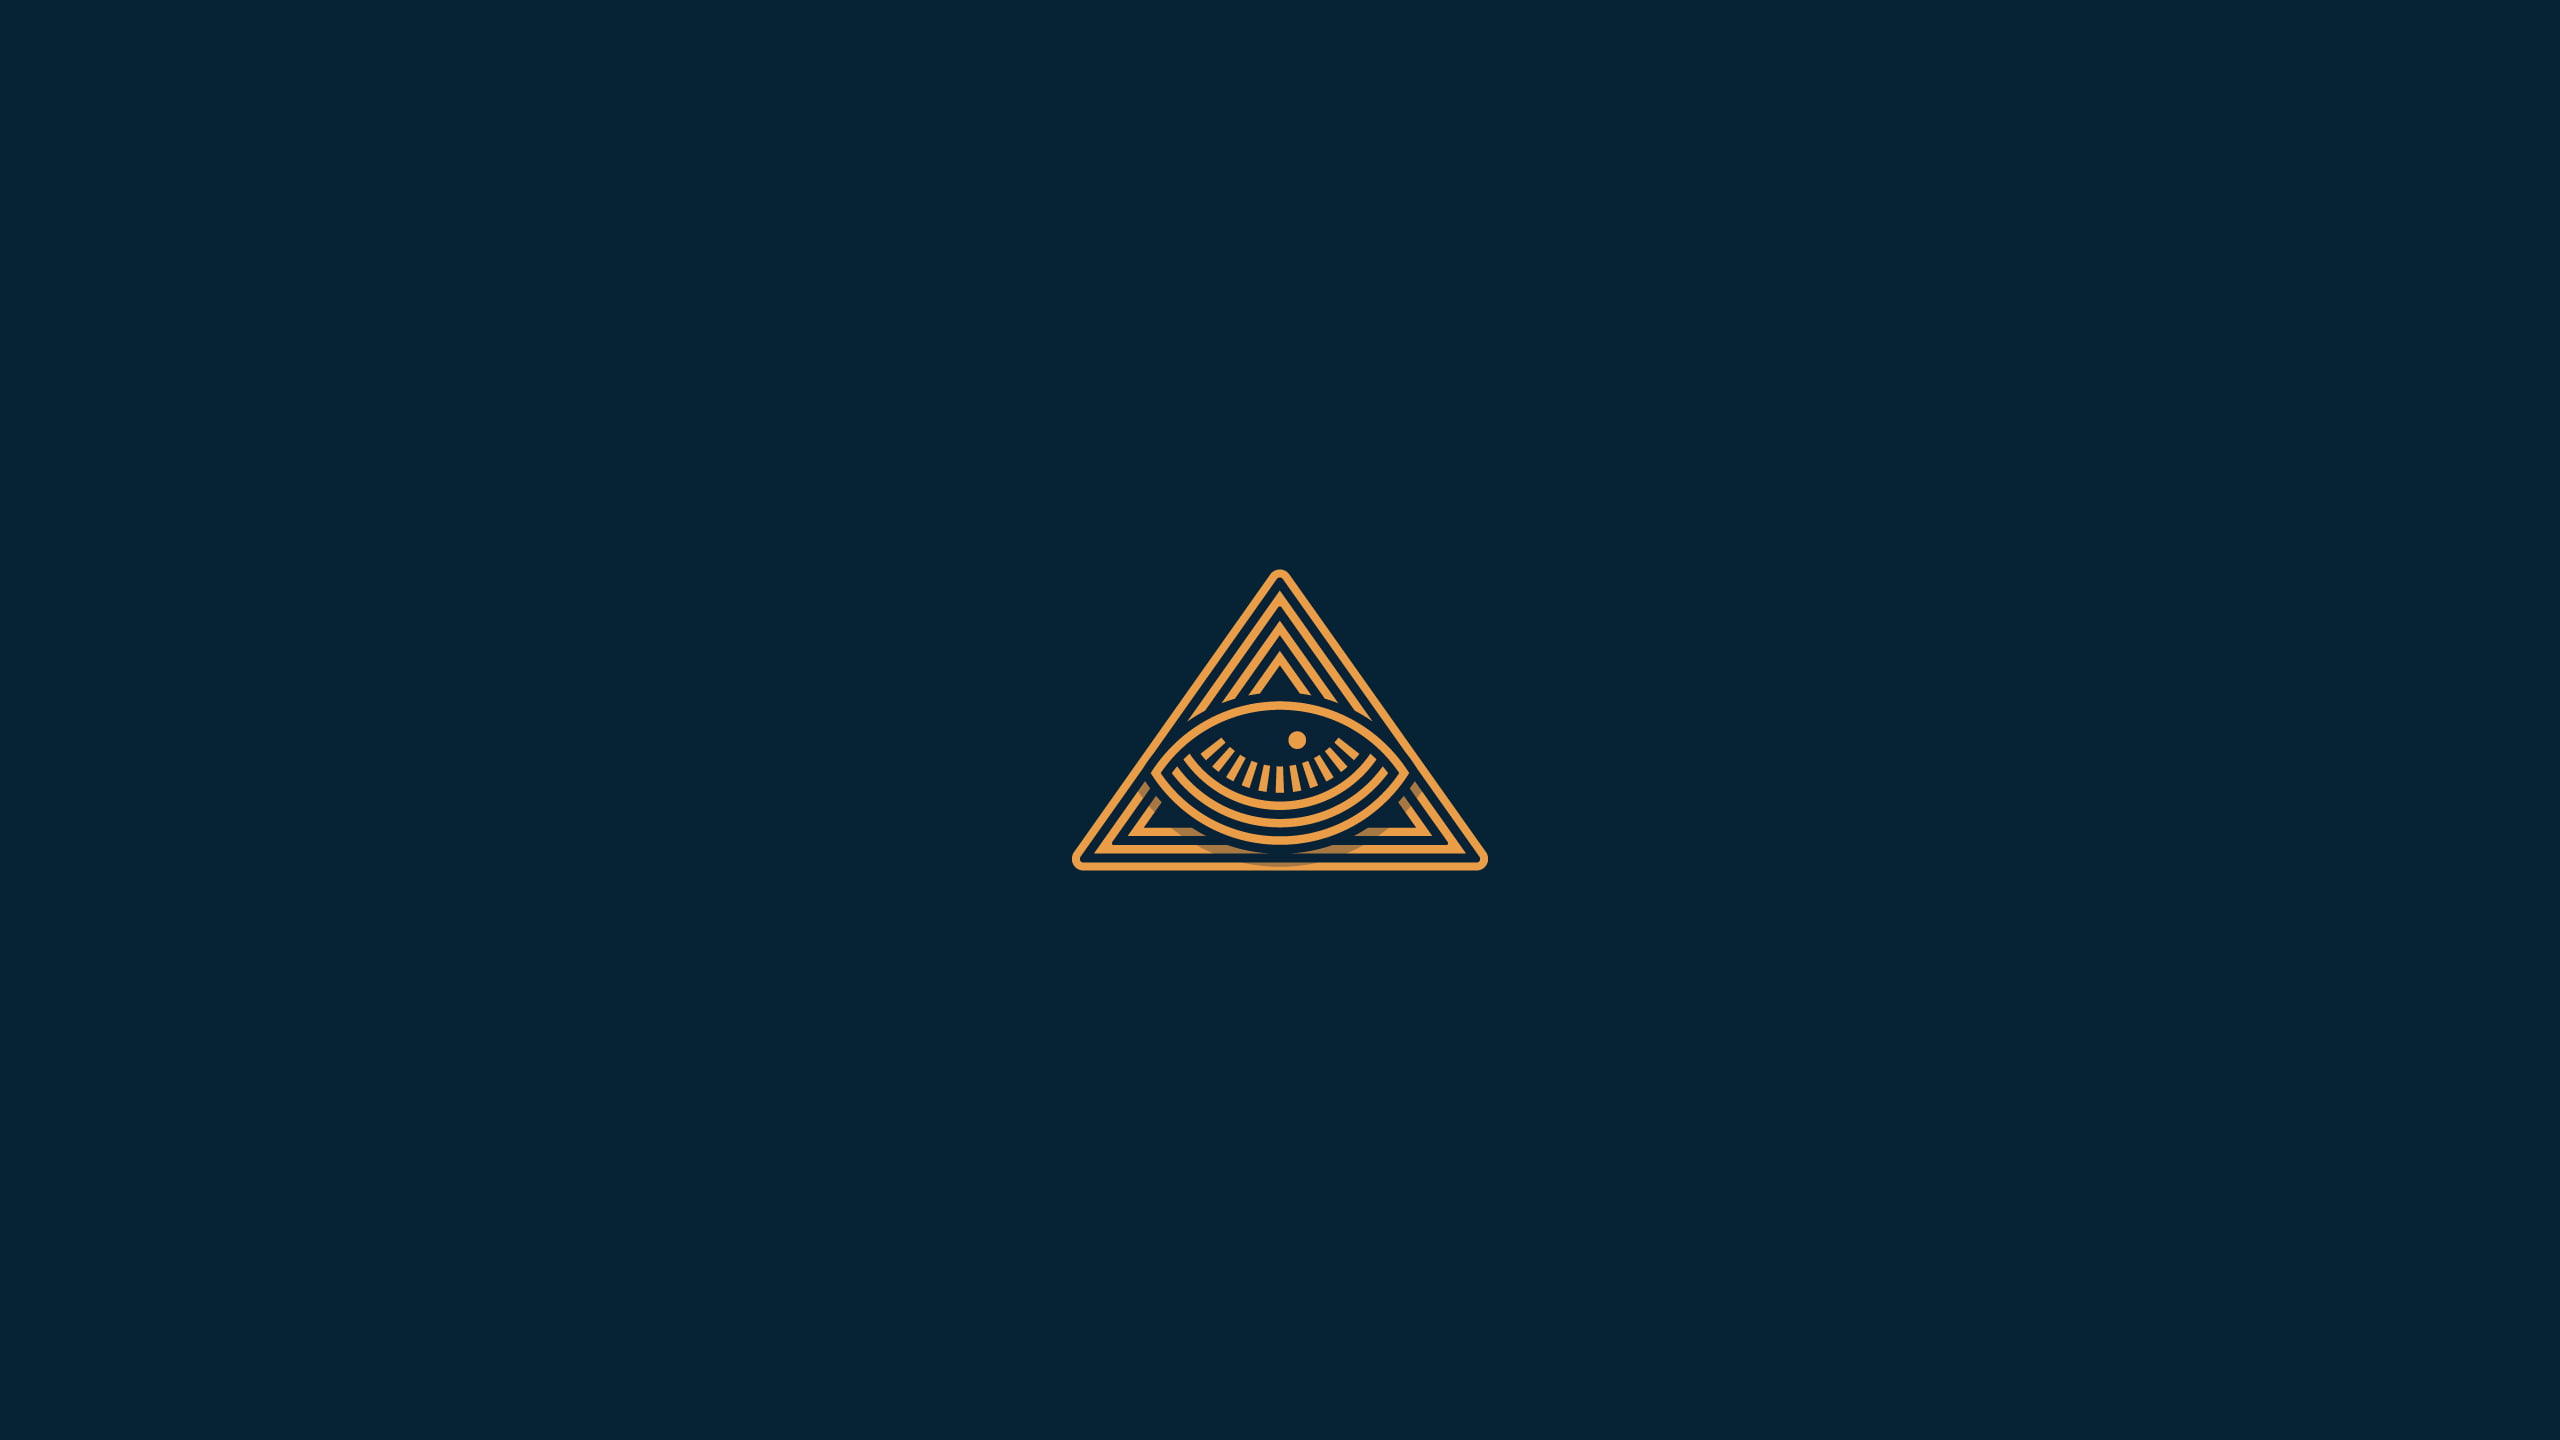 Eye Of Providence Wall Paper Graphic Design Blue Background